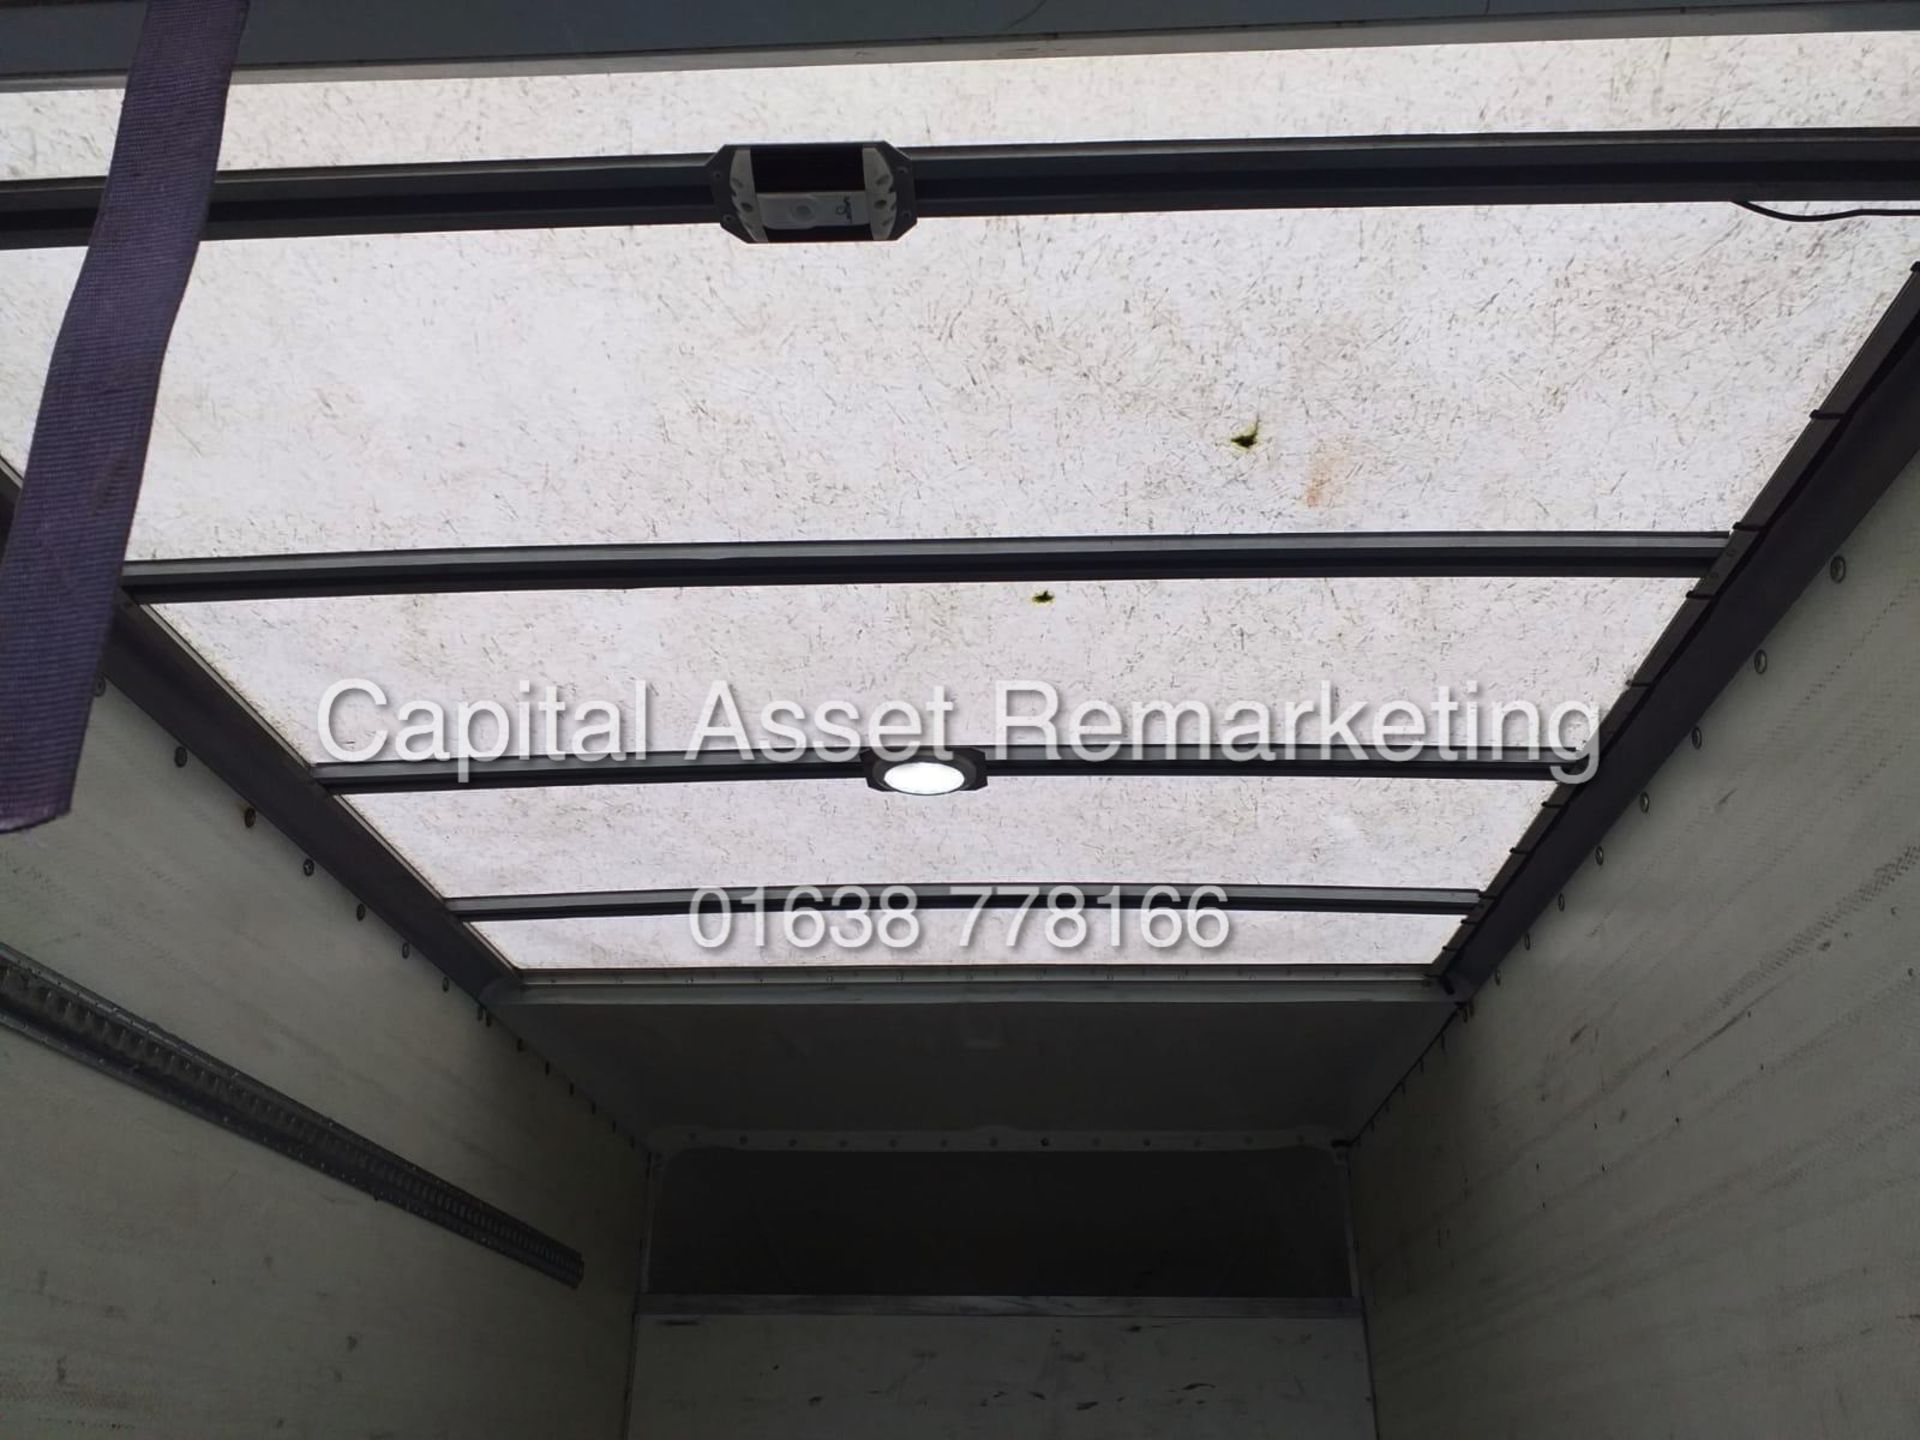 RENAULT MASTER 2.3CDTI "136BHP - 6 SPEED" 15FT LOW-LOADER BODY (2015 MODEL) IDEAL REMOVALS TRUCK - Image 9 of 14